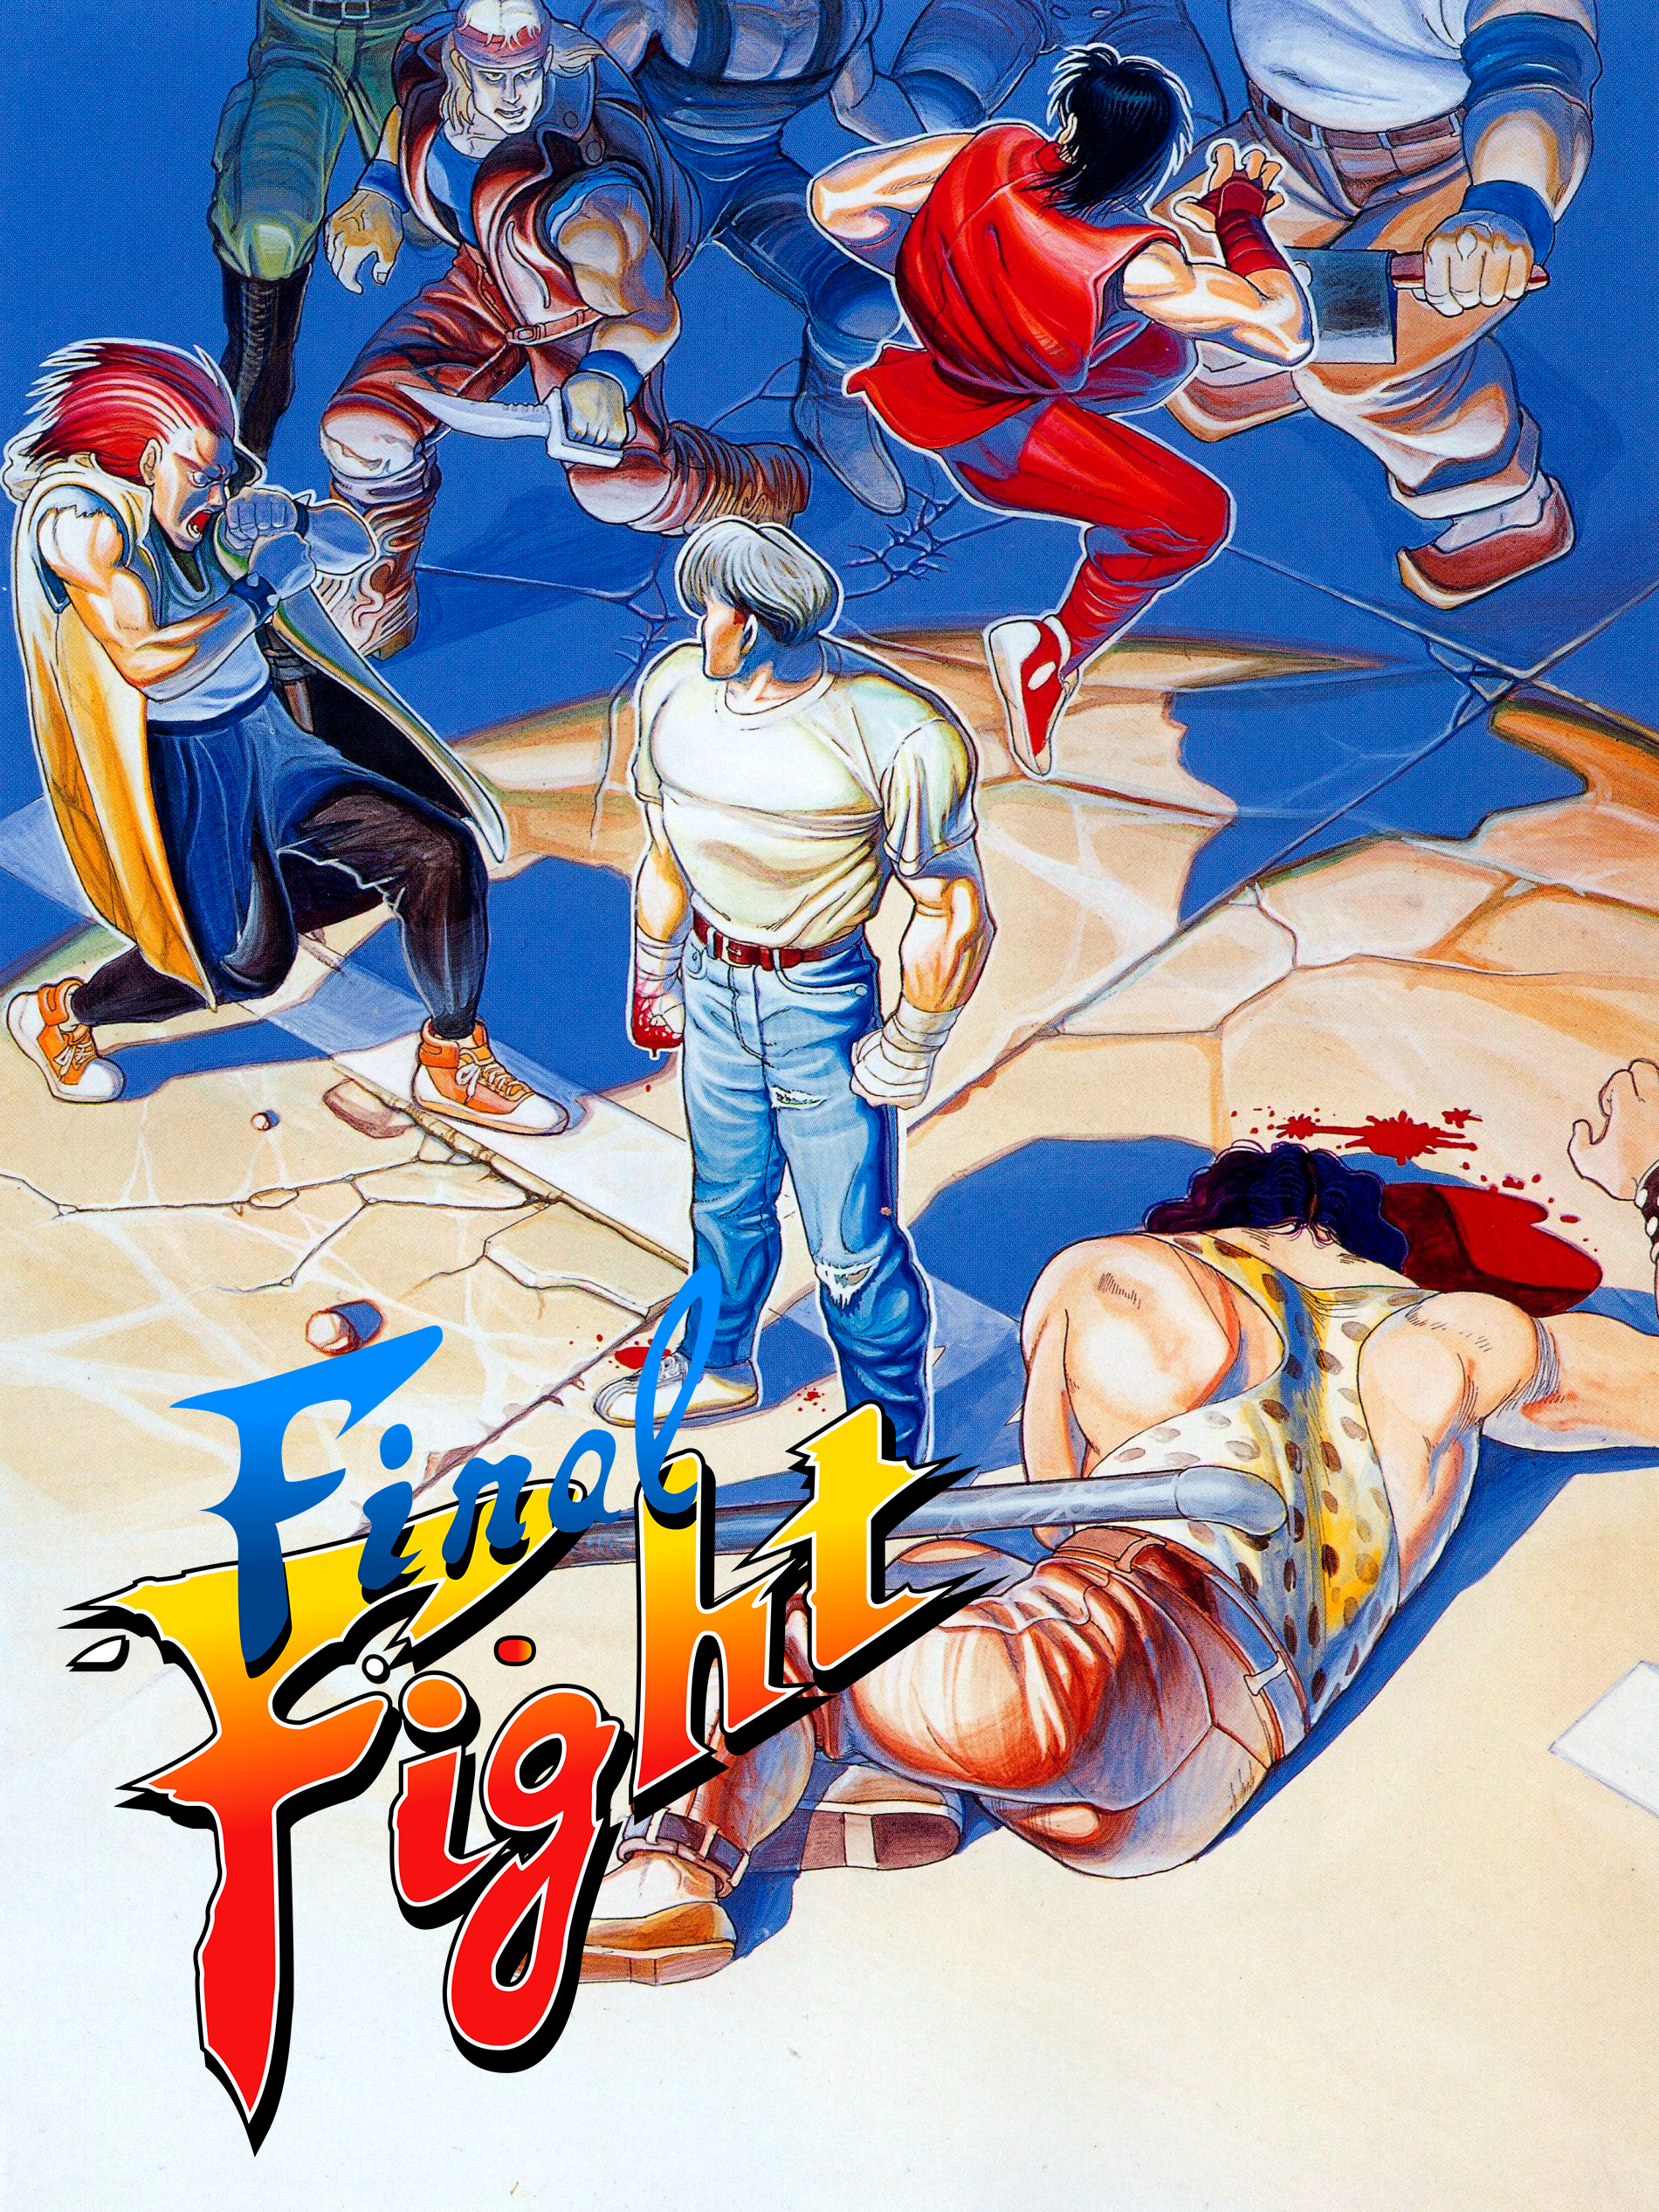 Final Fighter - Dear Fighters, Hi. Final Fighter is about